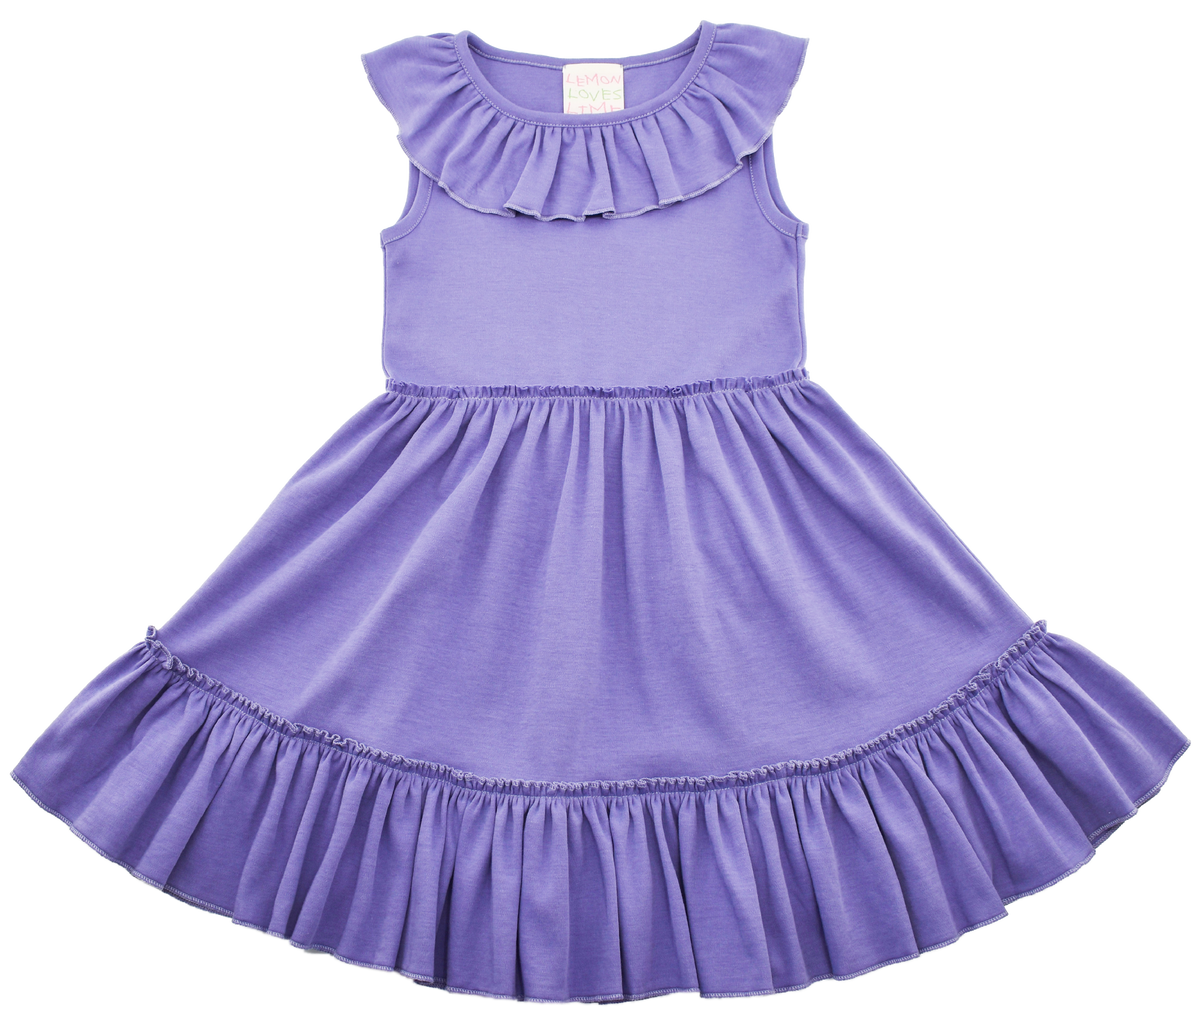 Veronica Morning Glory Dress by Lemon Loves Lime – P. Cottontail & Co.